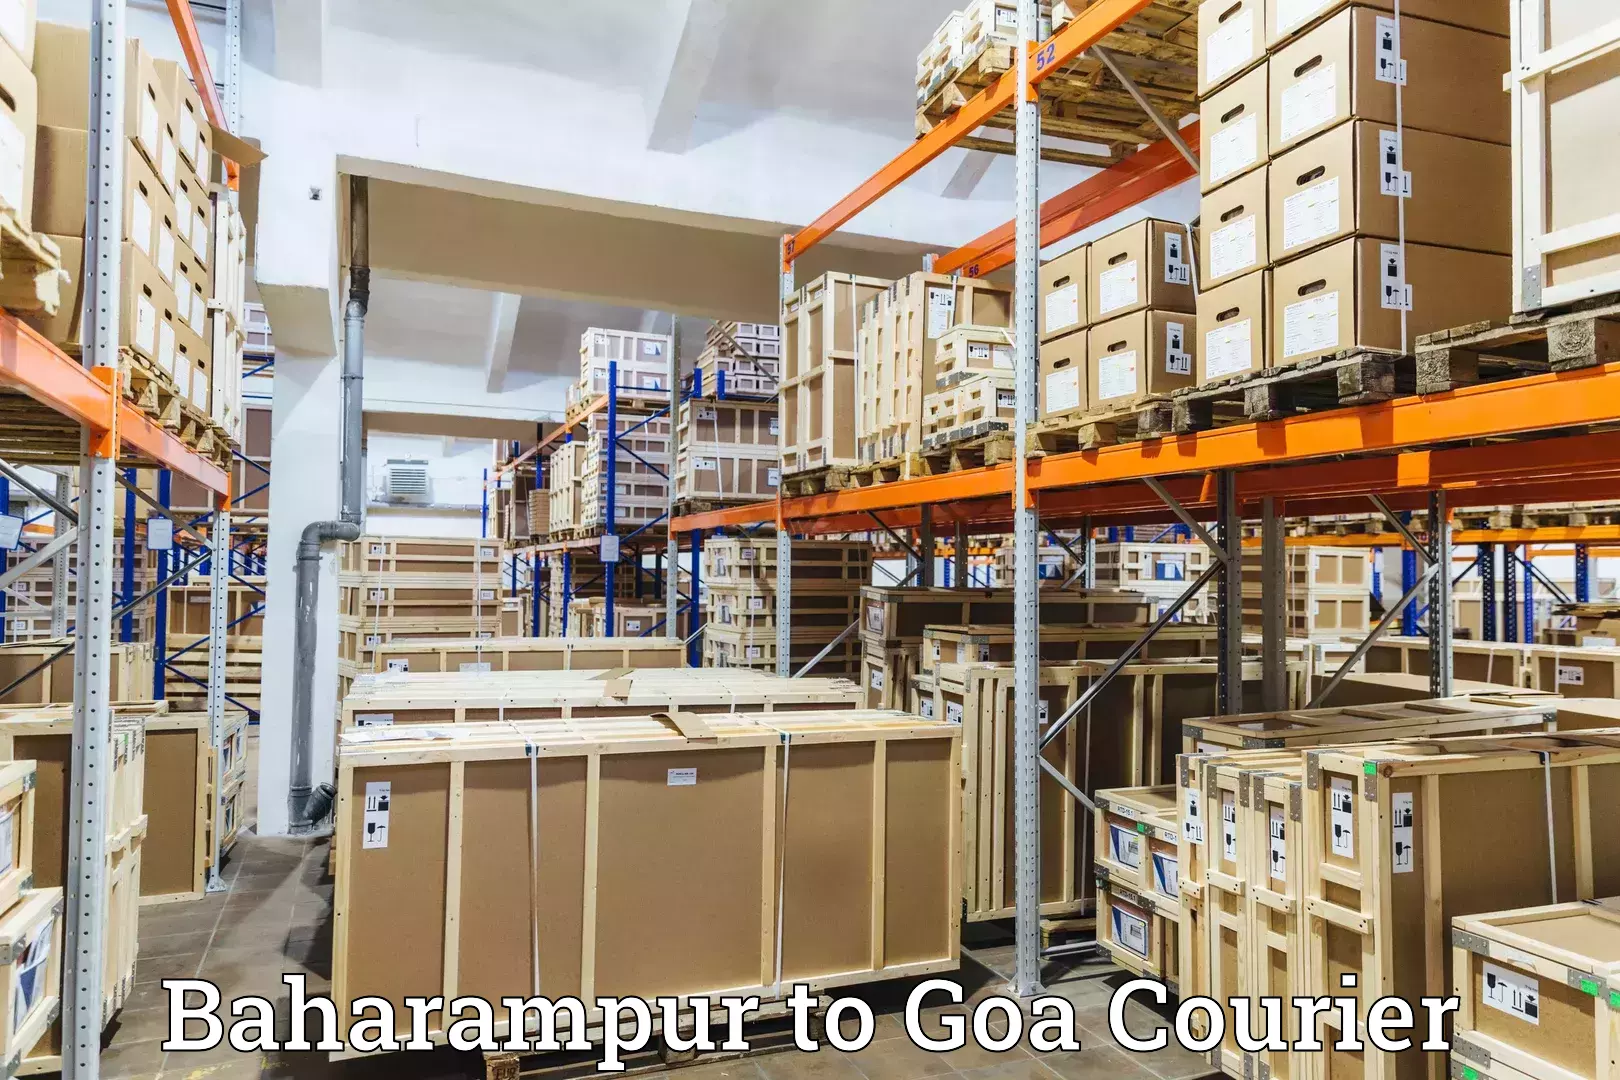 Courier service efficiency Baharampur to Goa